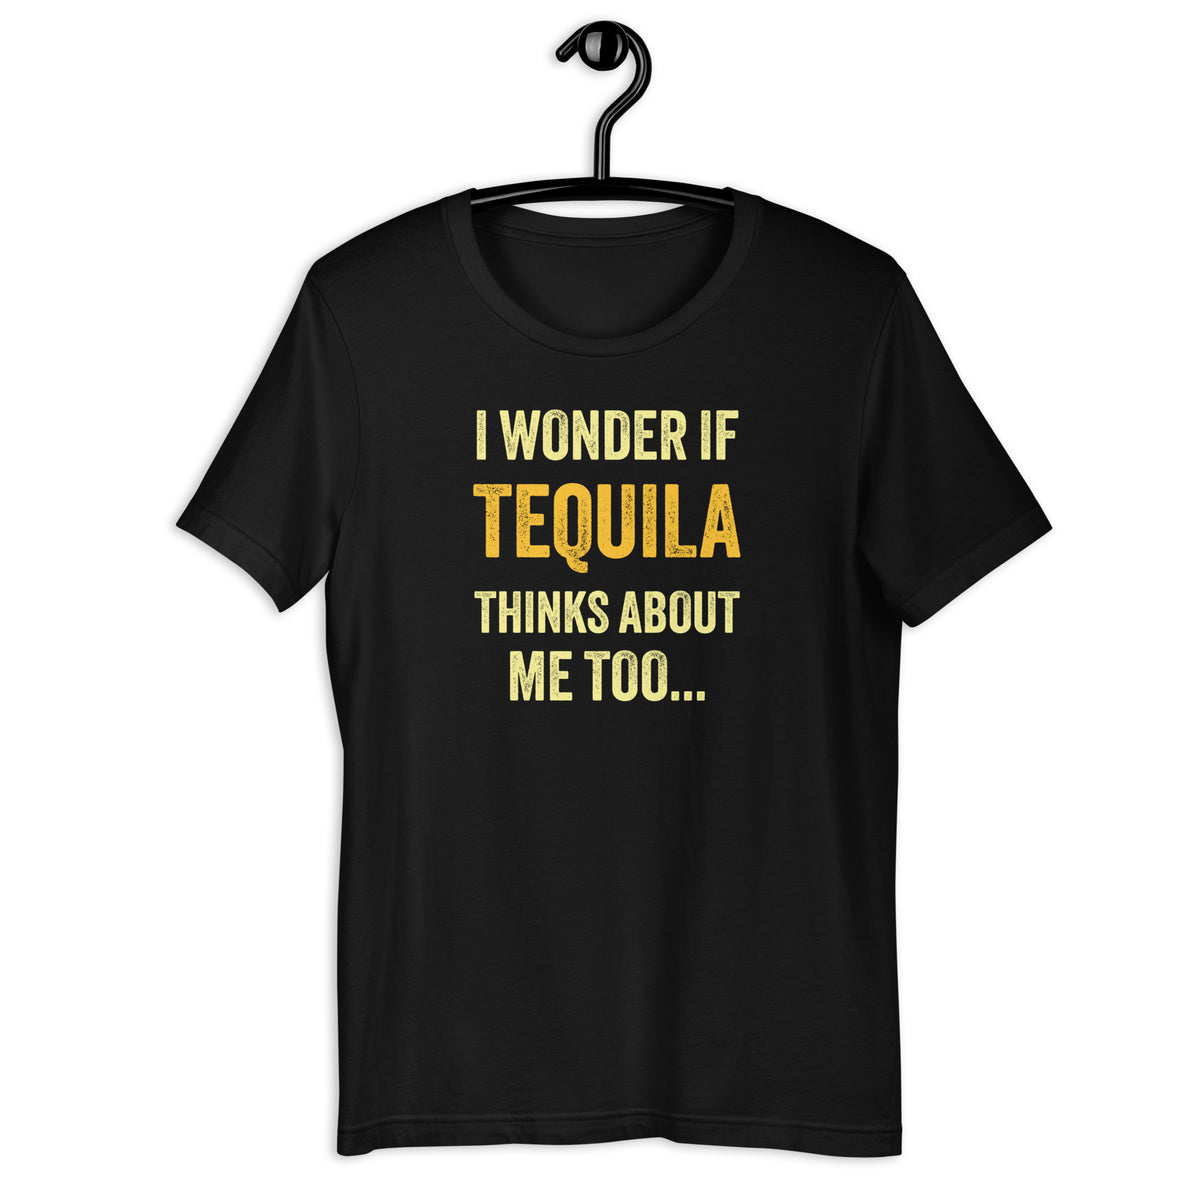 I Wonder If Tequila Thinks About Me Too T-Shirt - SHOPNOO